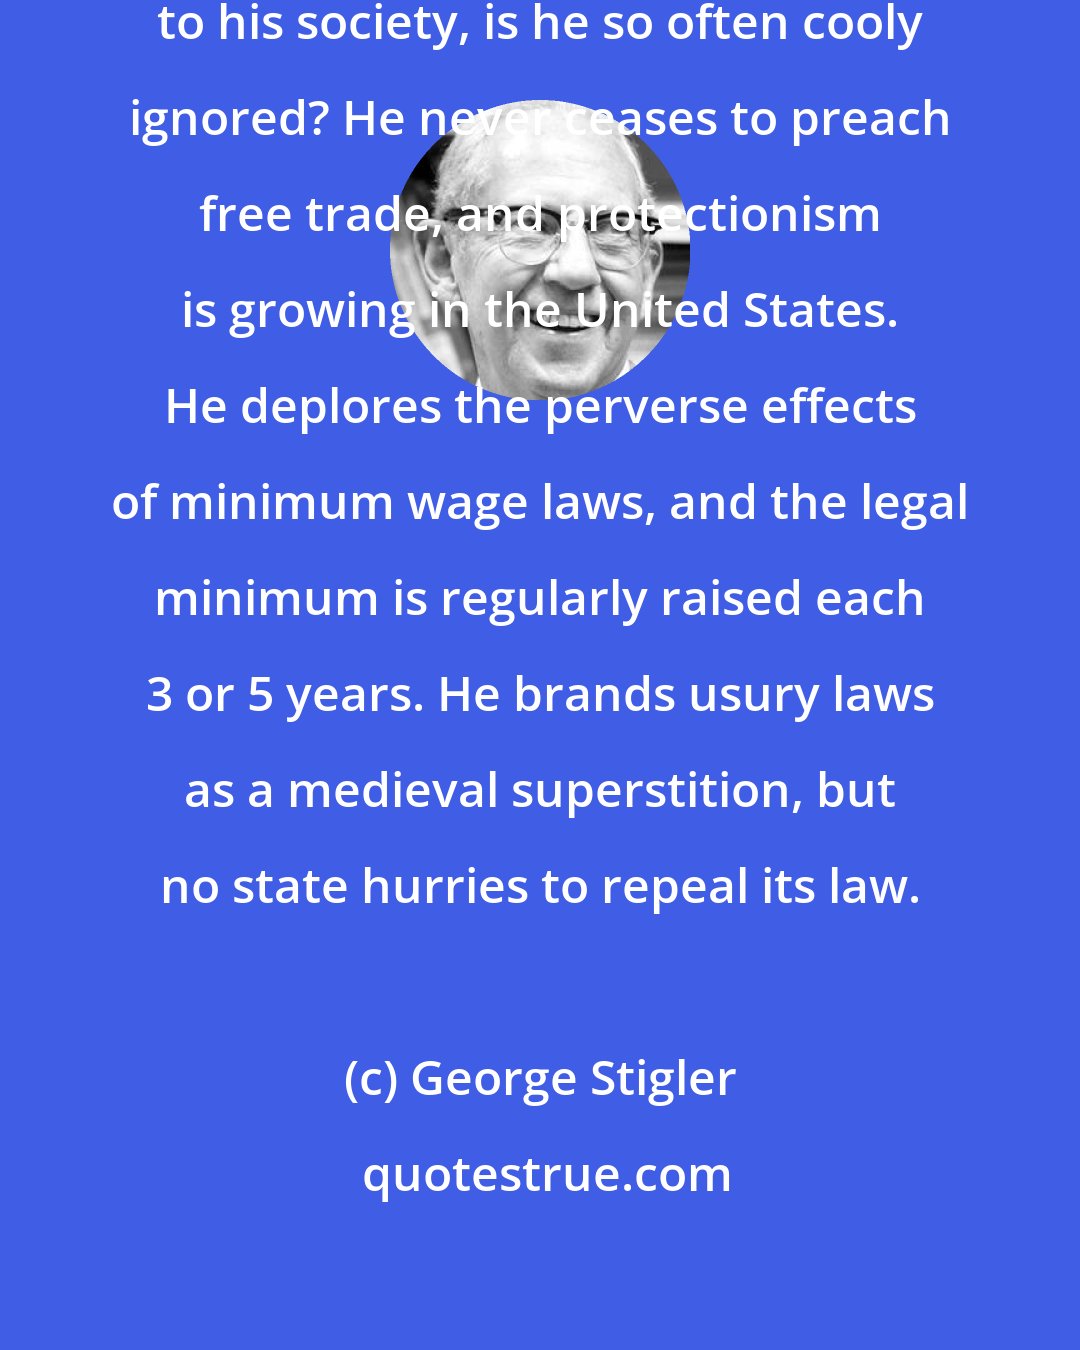 George Stigler: Why, when the economist gives advice to his society, is he so often cooly ignored? He never ceases to preach free trade, and protectionism is growing in the United States. He deplores the perverse effects of minimum wage laws, and the legal minimum is regularly raised each 3 or 5 years. He brands usury laws as a medieval superstition, but no state hurries to repeal its law.